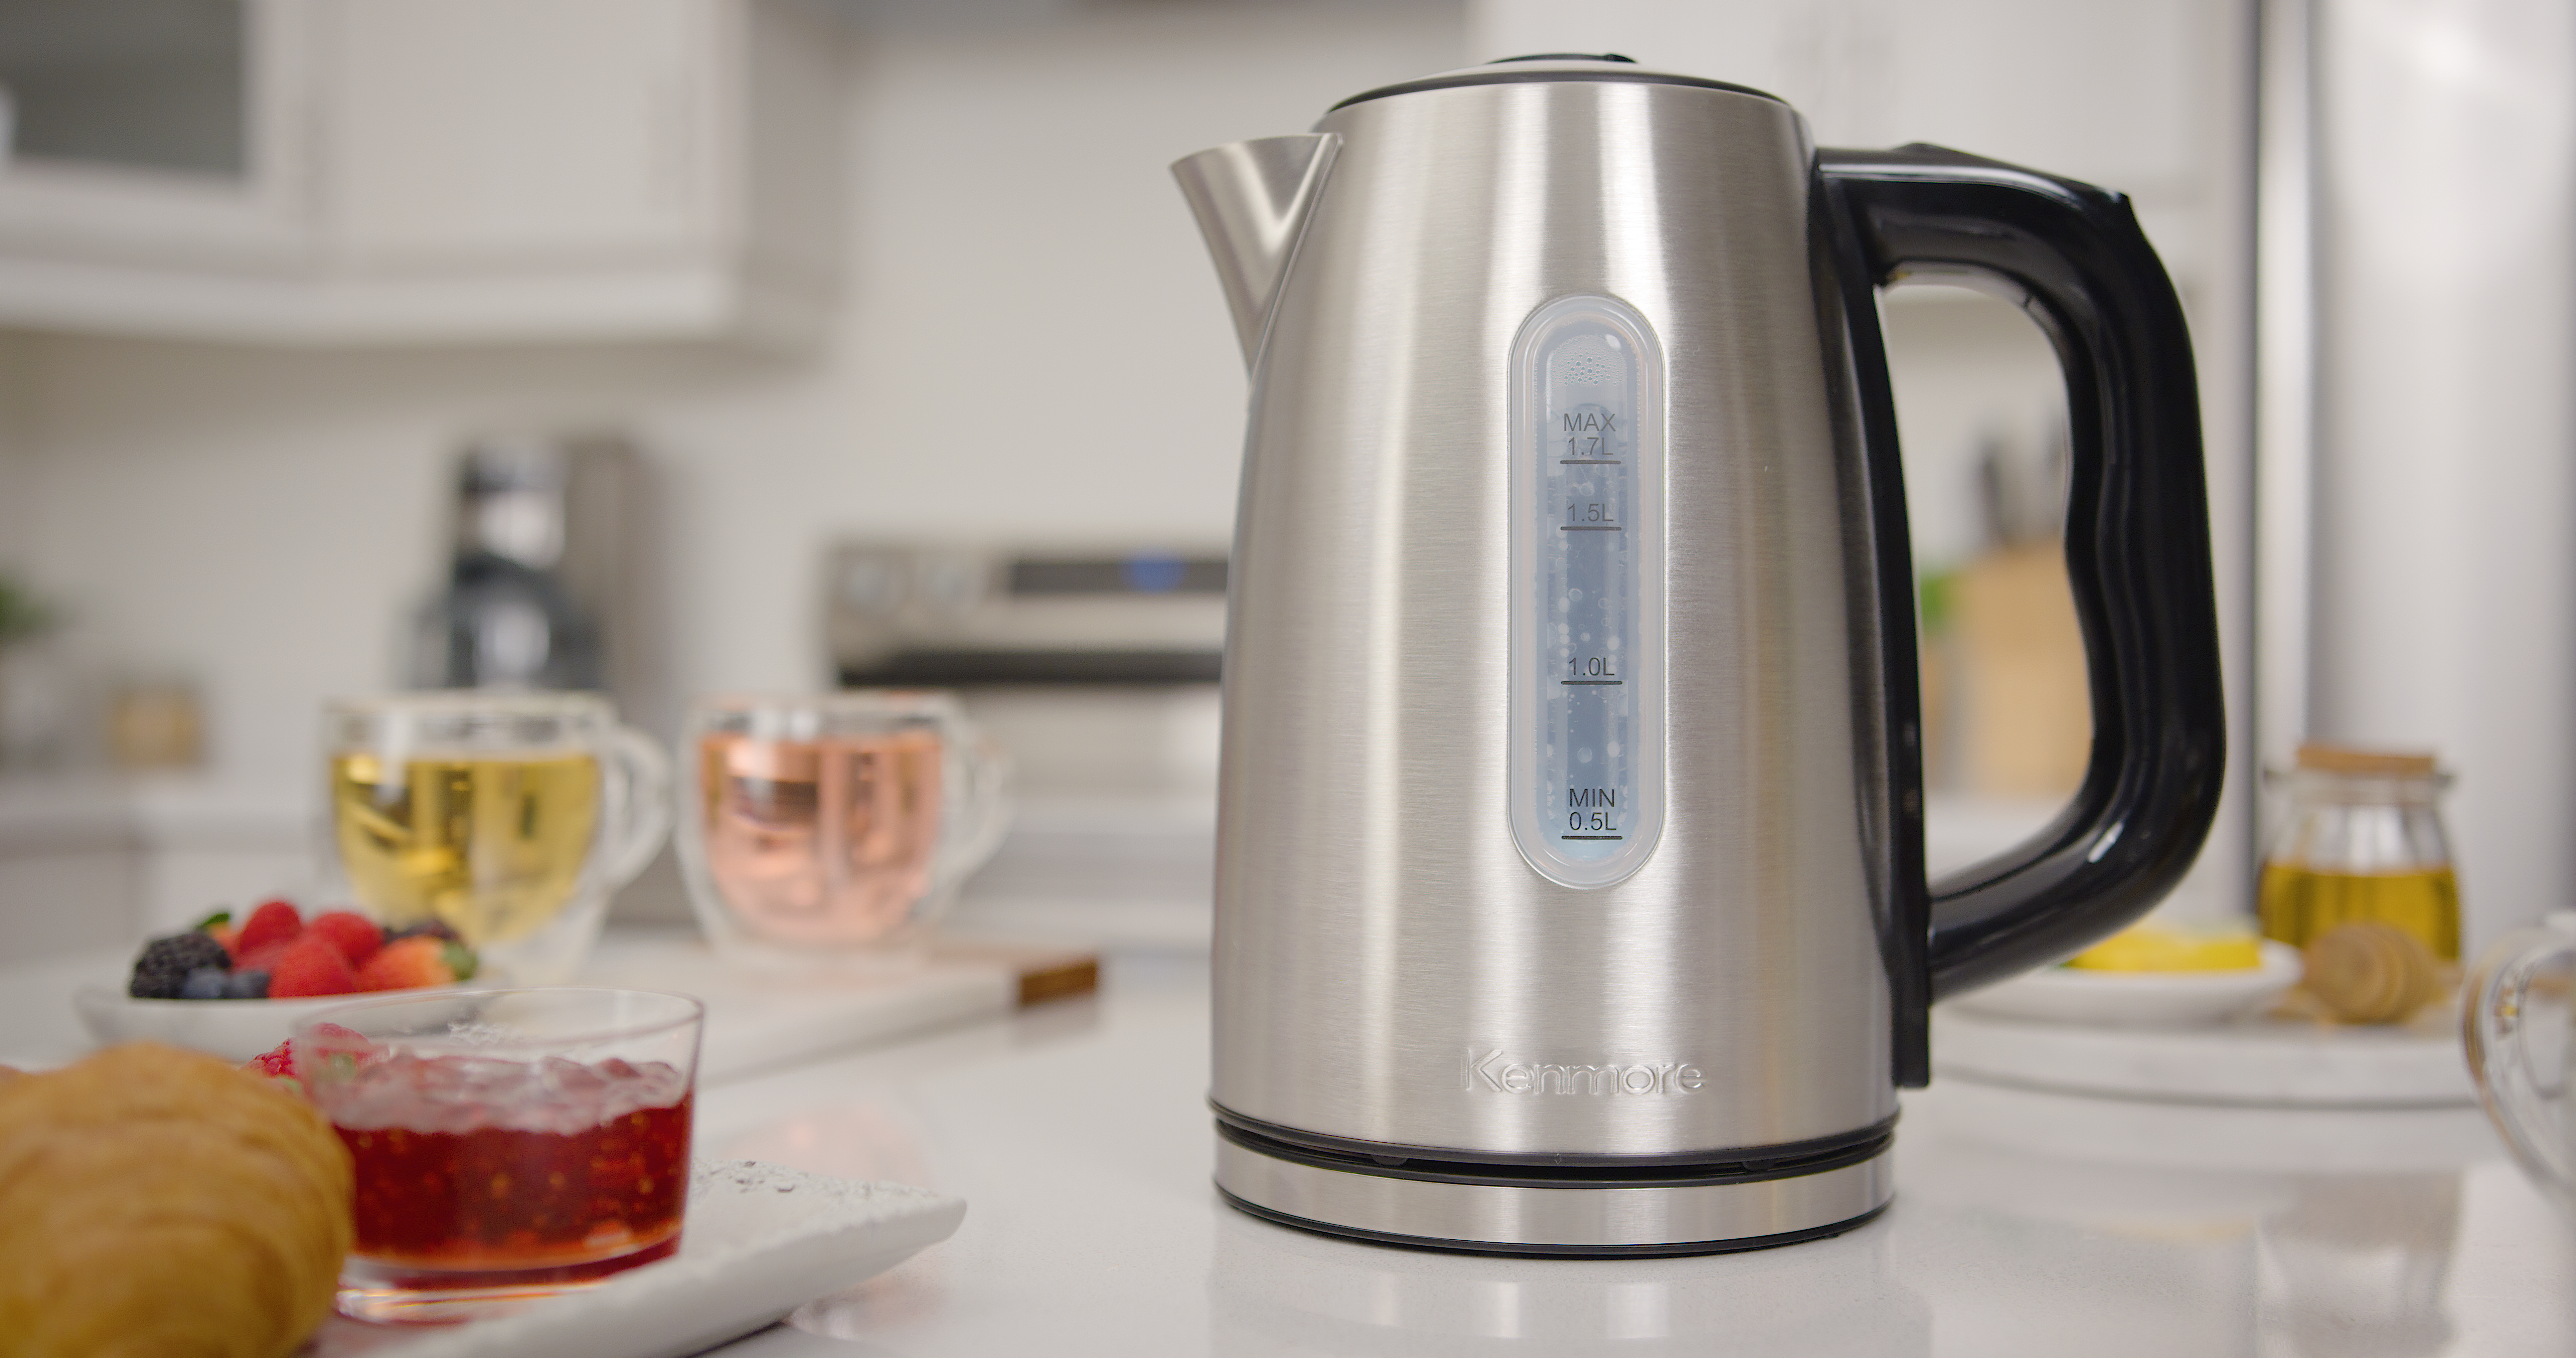 The Ultimate Gift this Holiday Season- Kenmore Digital Kettle!